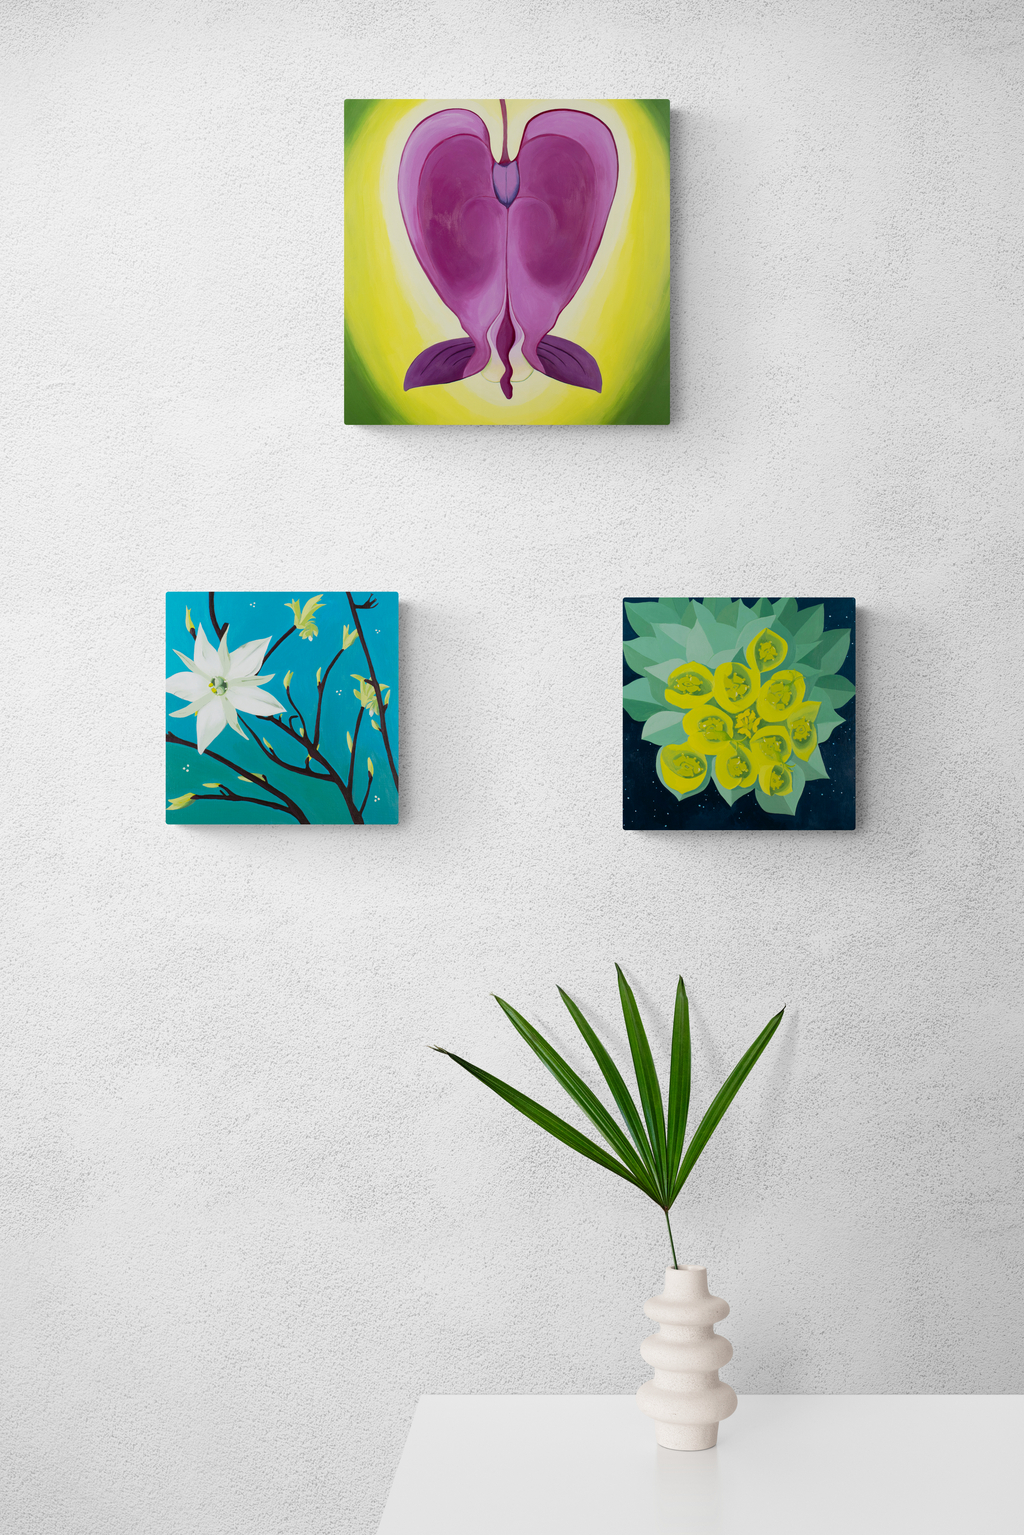 three flower paintings by Amy Daileda on wall with palm frond in vase